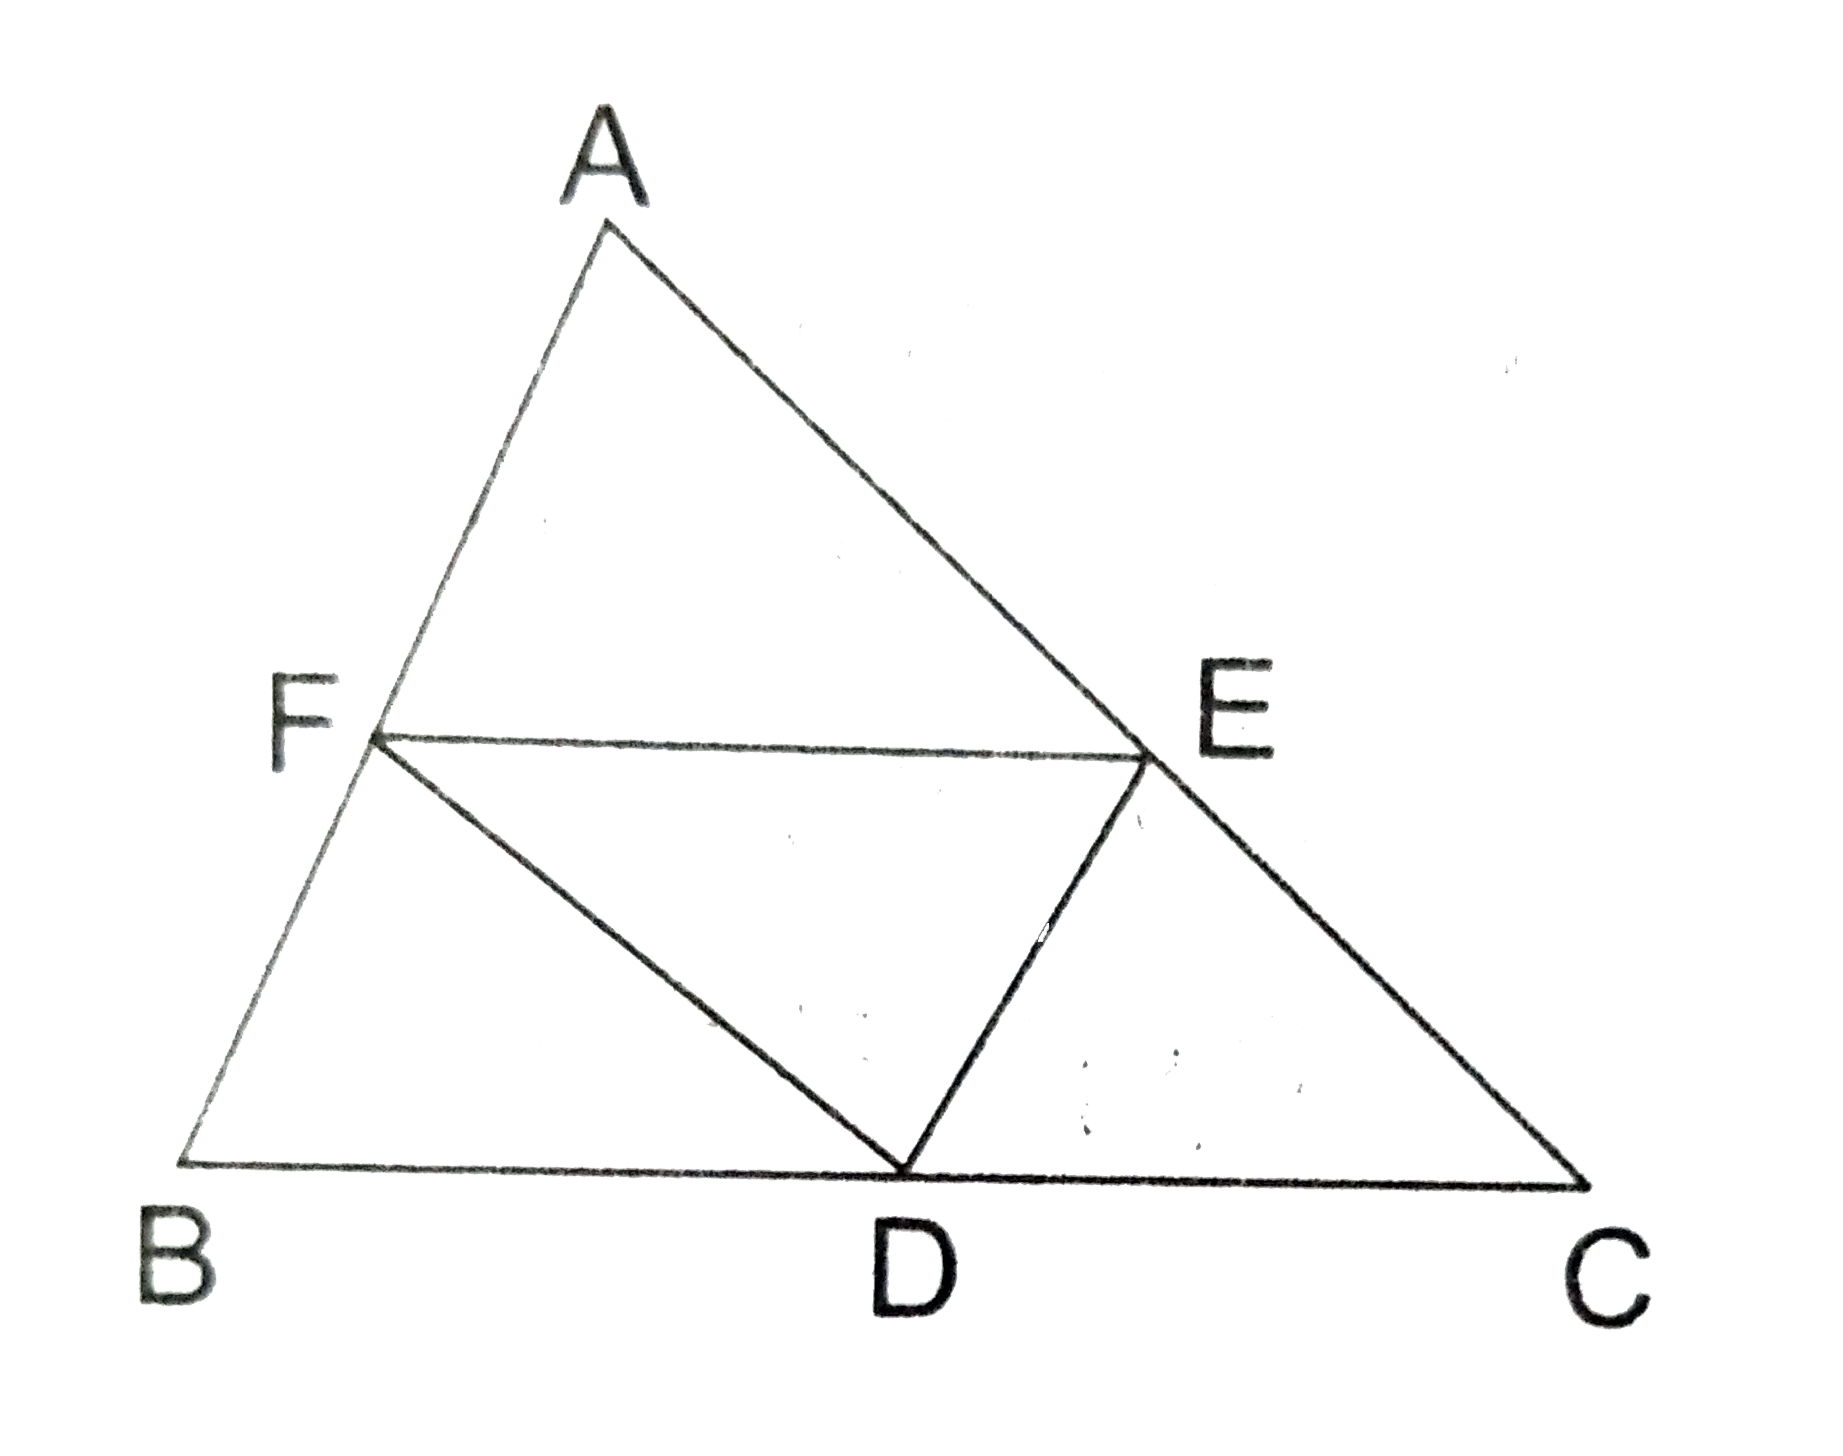 In the adjoining figure, D, E, F are the midpoints of the sides BC, CA and AB respectively, of triangle ABC. Show that angle EDF = angle A, angle DEF= angle B  and angle DFE= angle C.